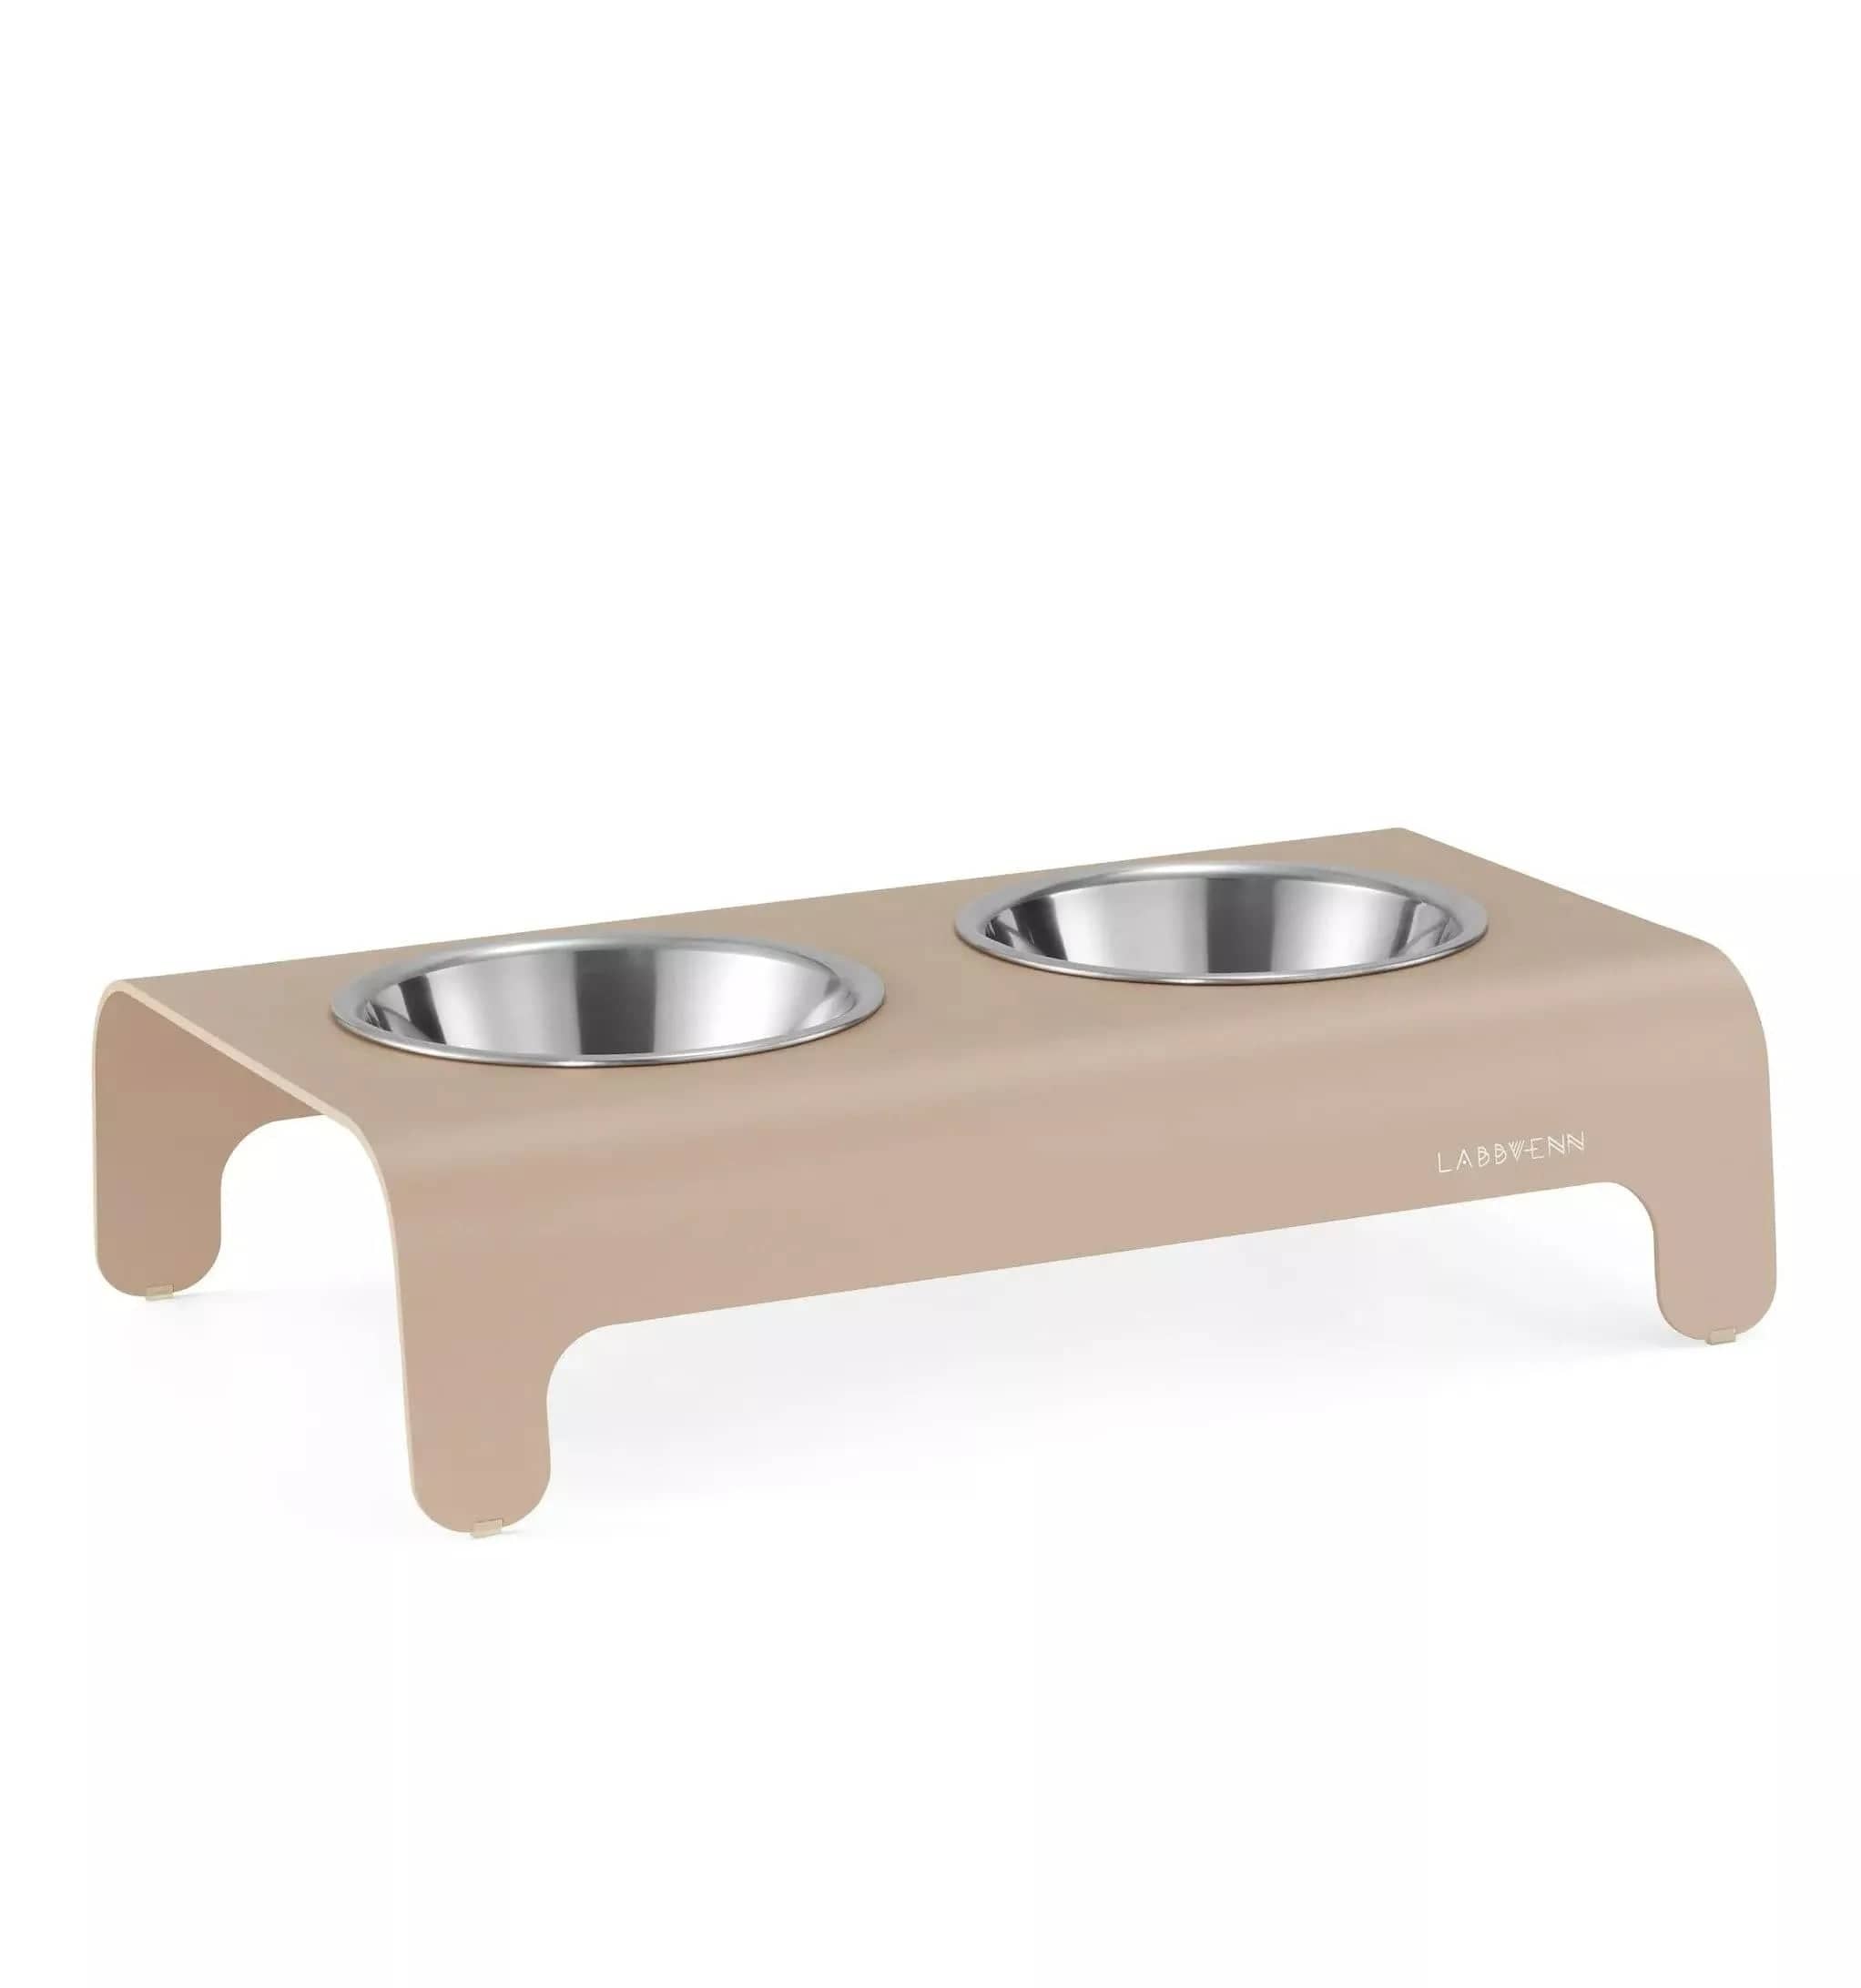 Hygienic stainless steel bowl for feeder dogs